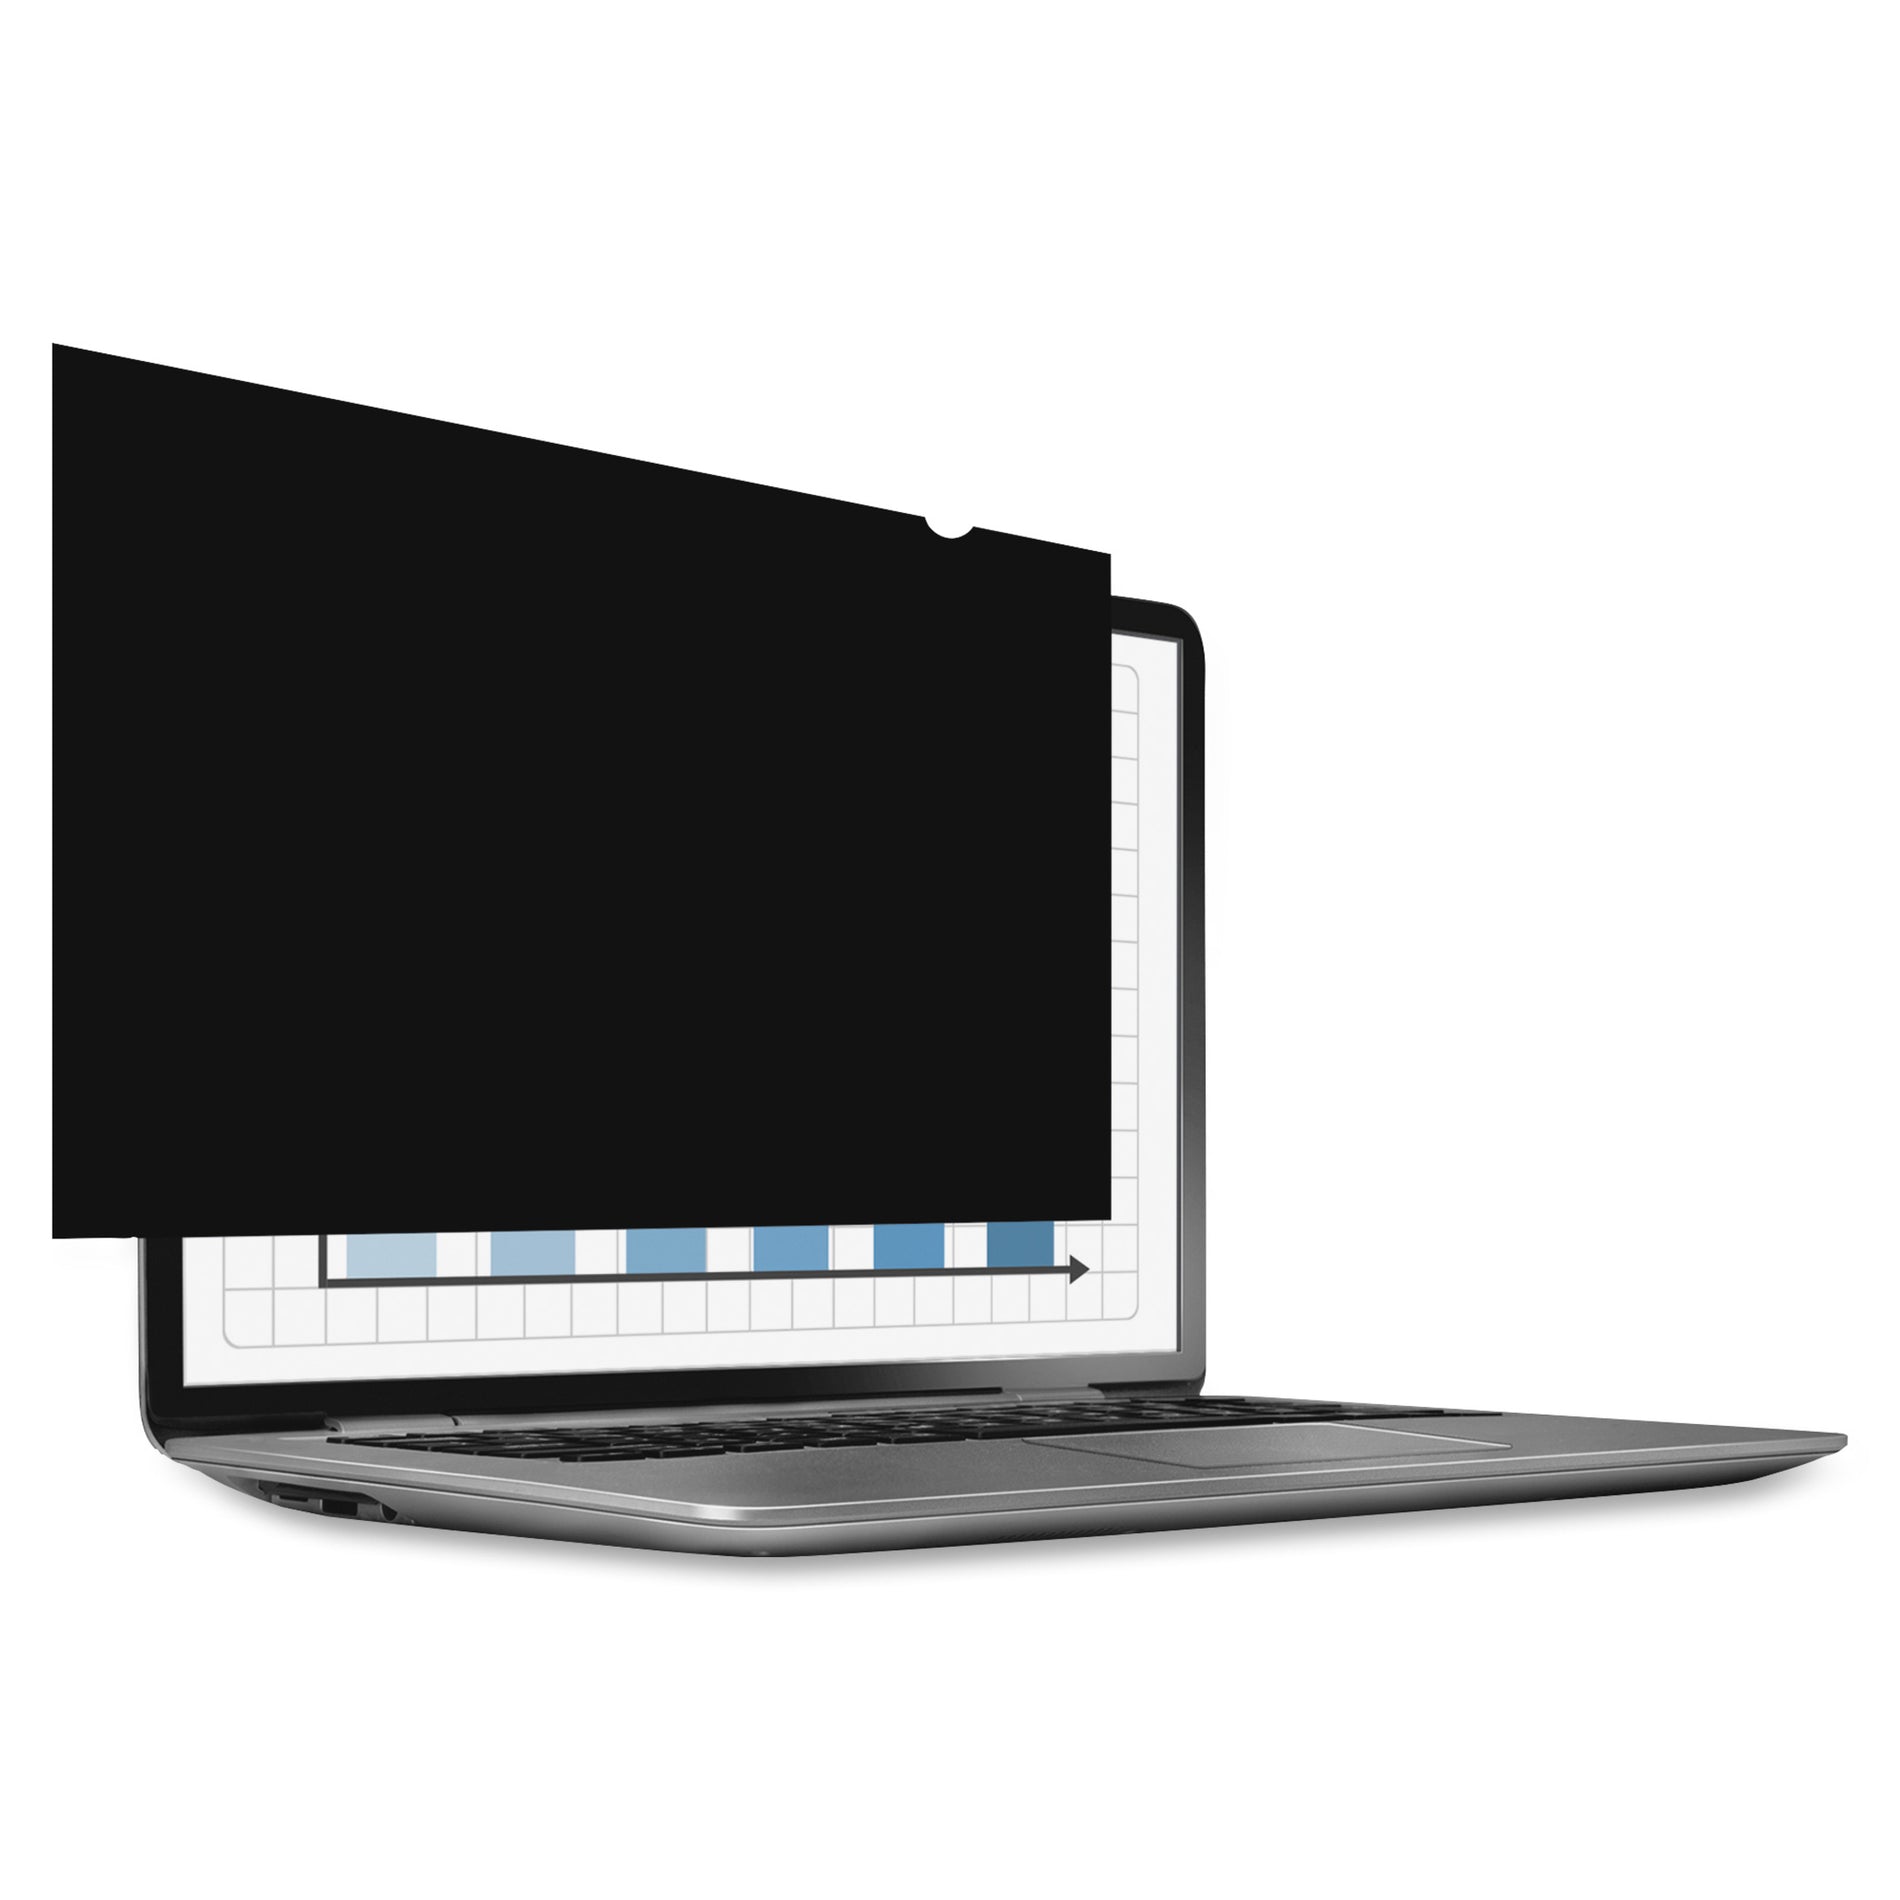 Fellowes 4815001 PrivaScreen Blackout Privacy Filter, 27" Wide-screen, 16:9, Easy to Apply/Remove, Blue Light Reduction